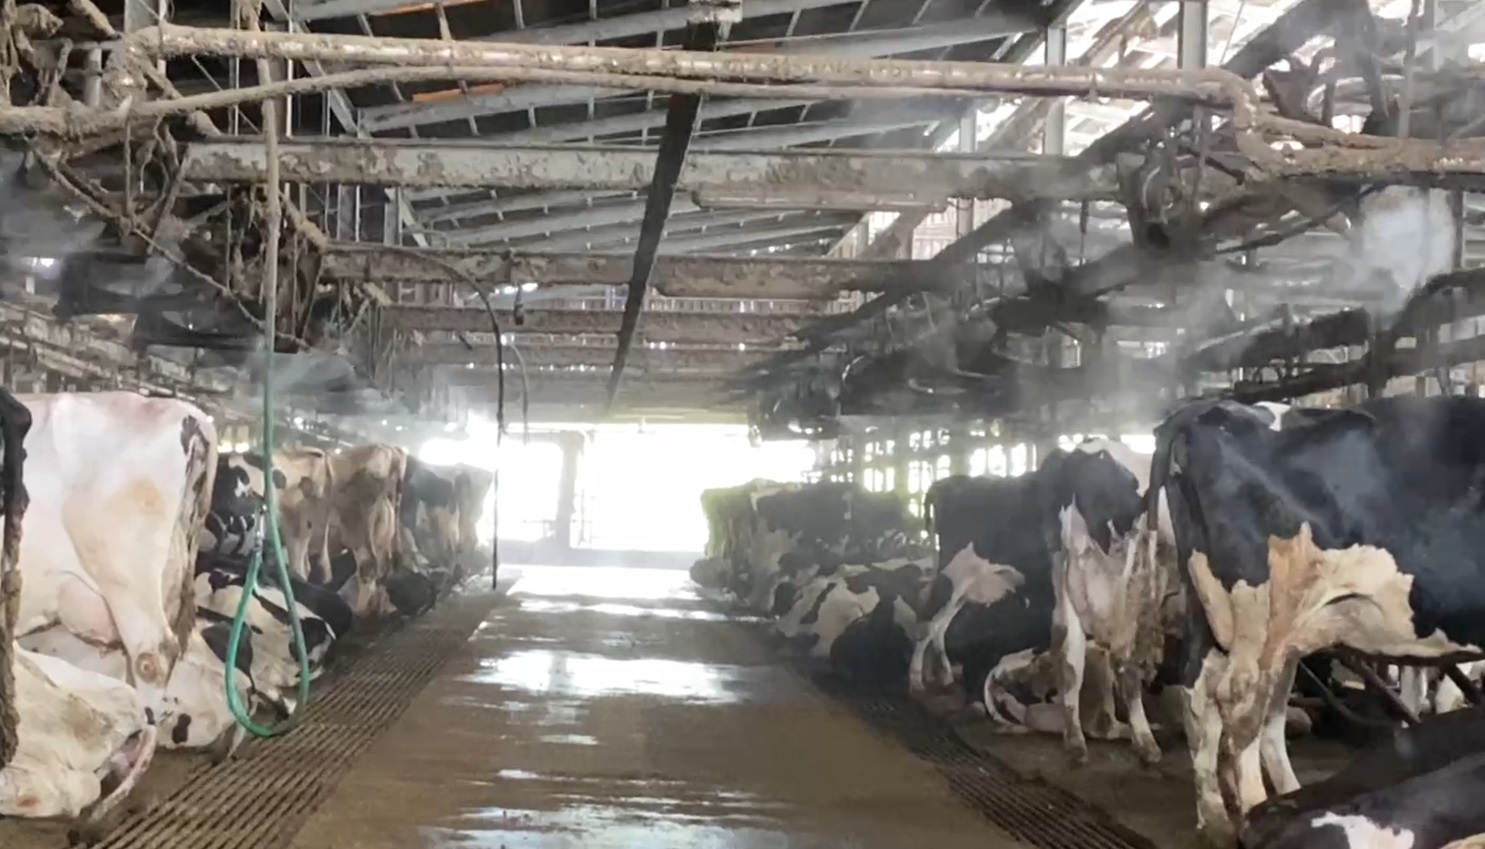 Cleanliness and optimal ventilation to ensure the well-being of the cows